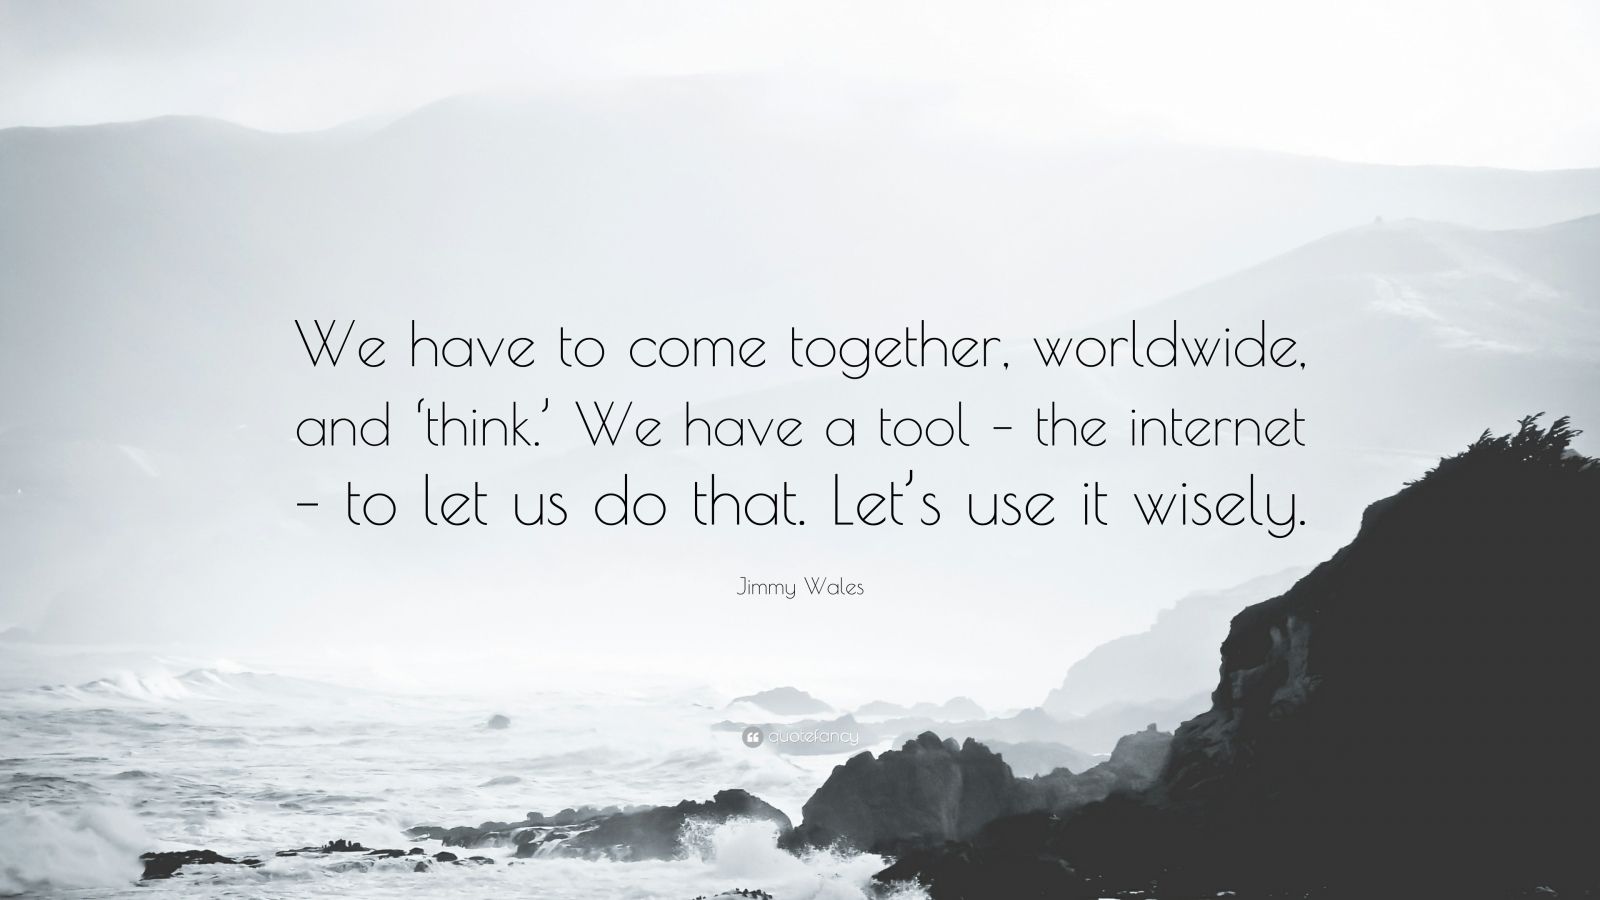 Hasil gambar untuk jimmy wales quote use internet wisely